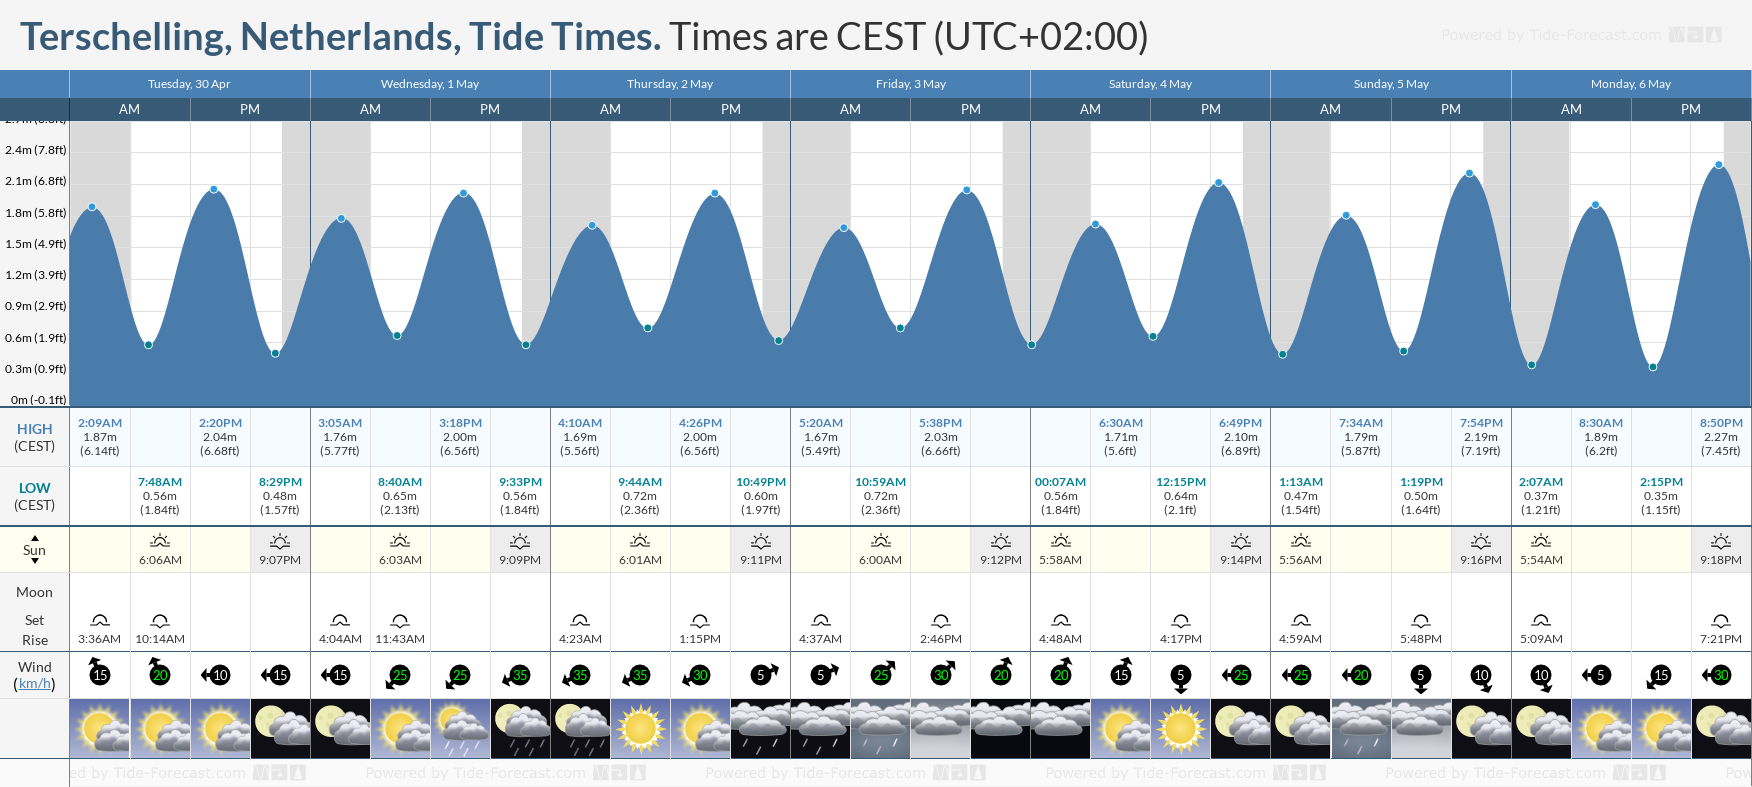 Terschelling, Netherlands Tide Chart including high and low tide tide times for the next 7 days